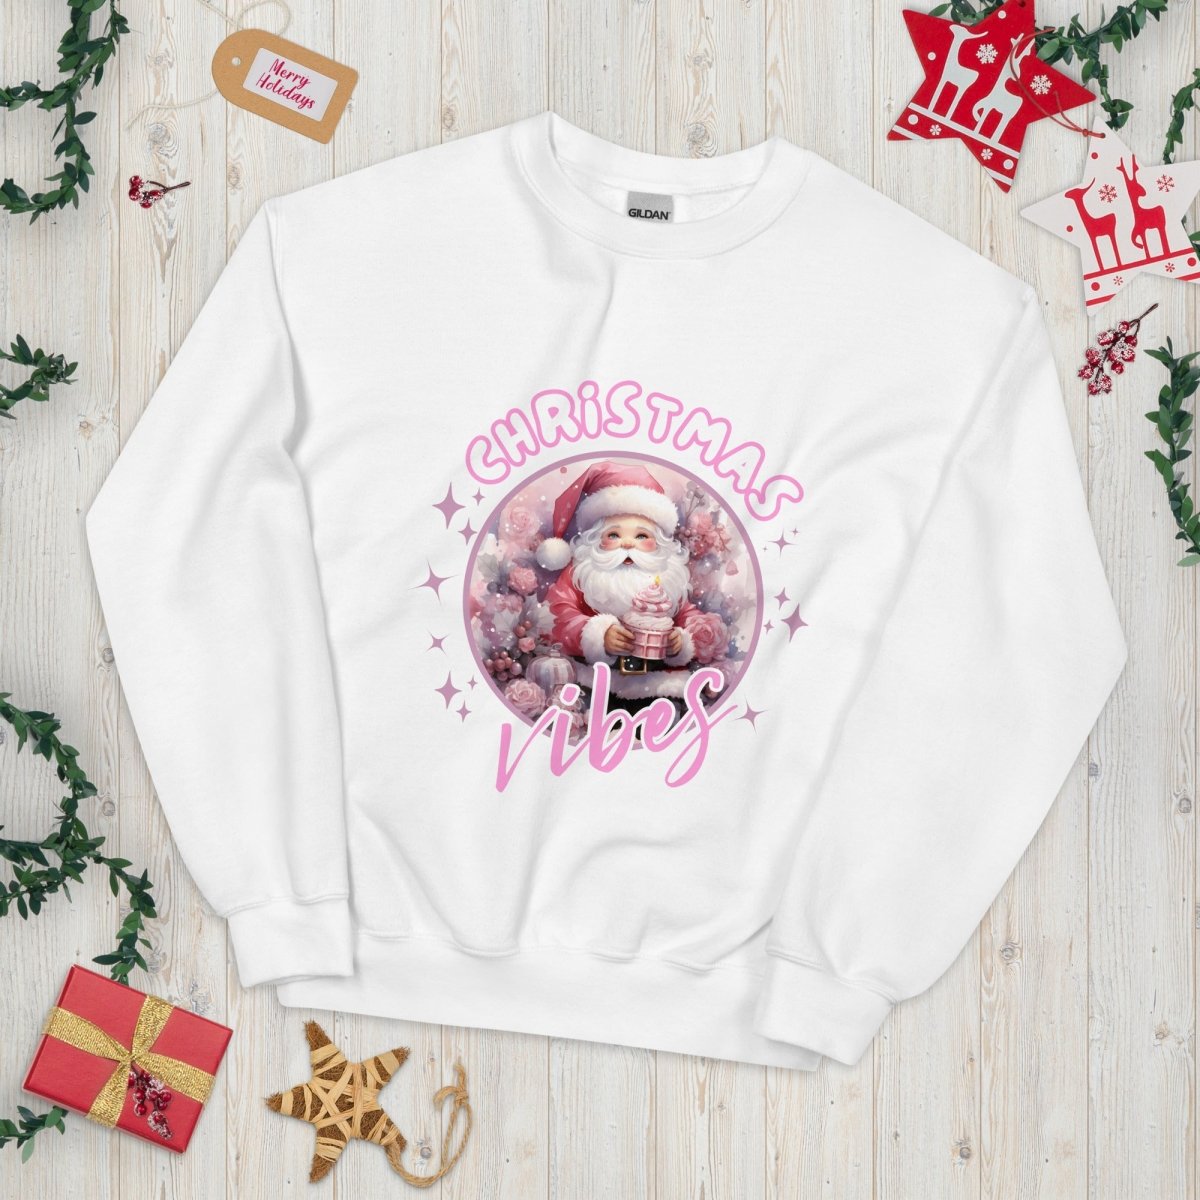 Christmas Vibes Santa Pullover - High Quality Funny Unisex Sweatshirt, Pink Holiday Design, Christmas Vacation Sweater, Cute Pink Santa - Everything Pixel